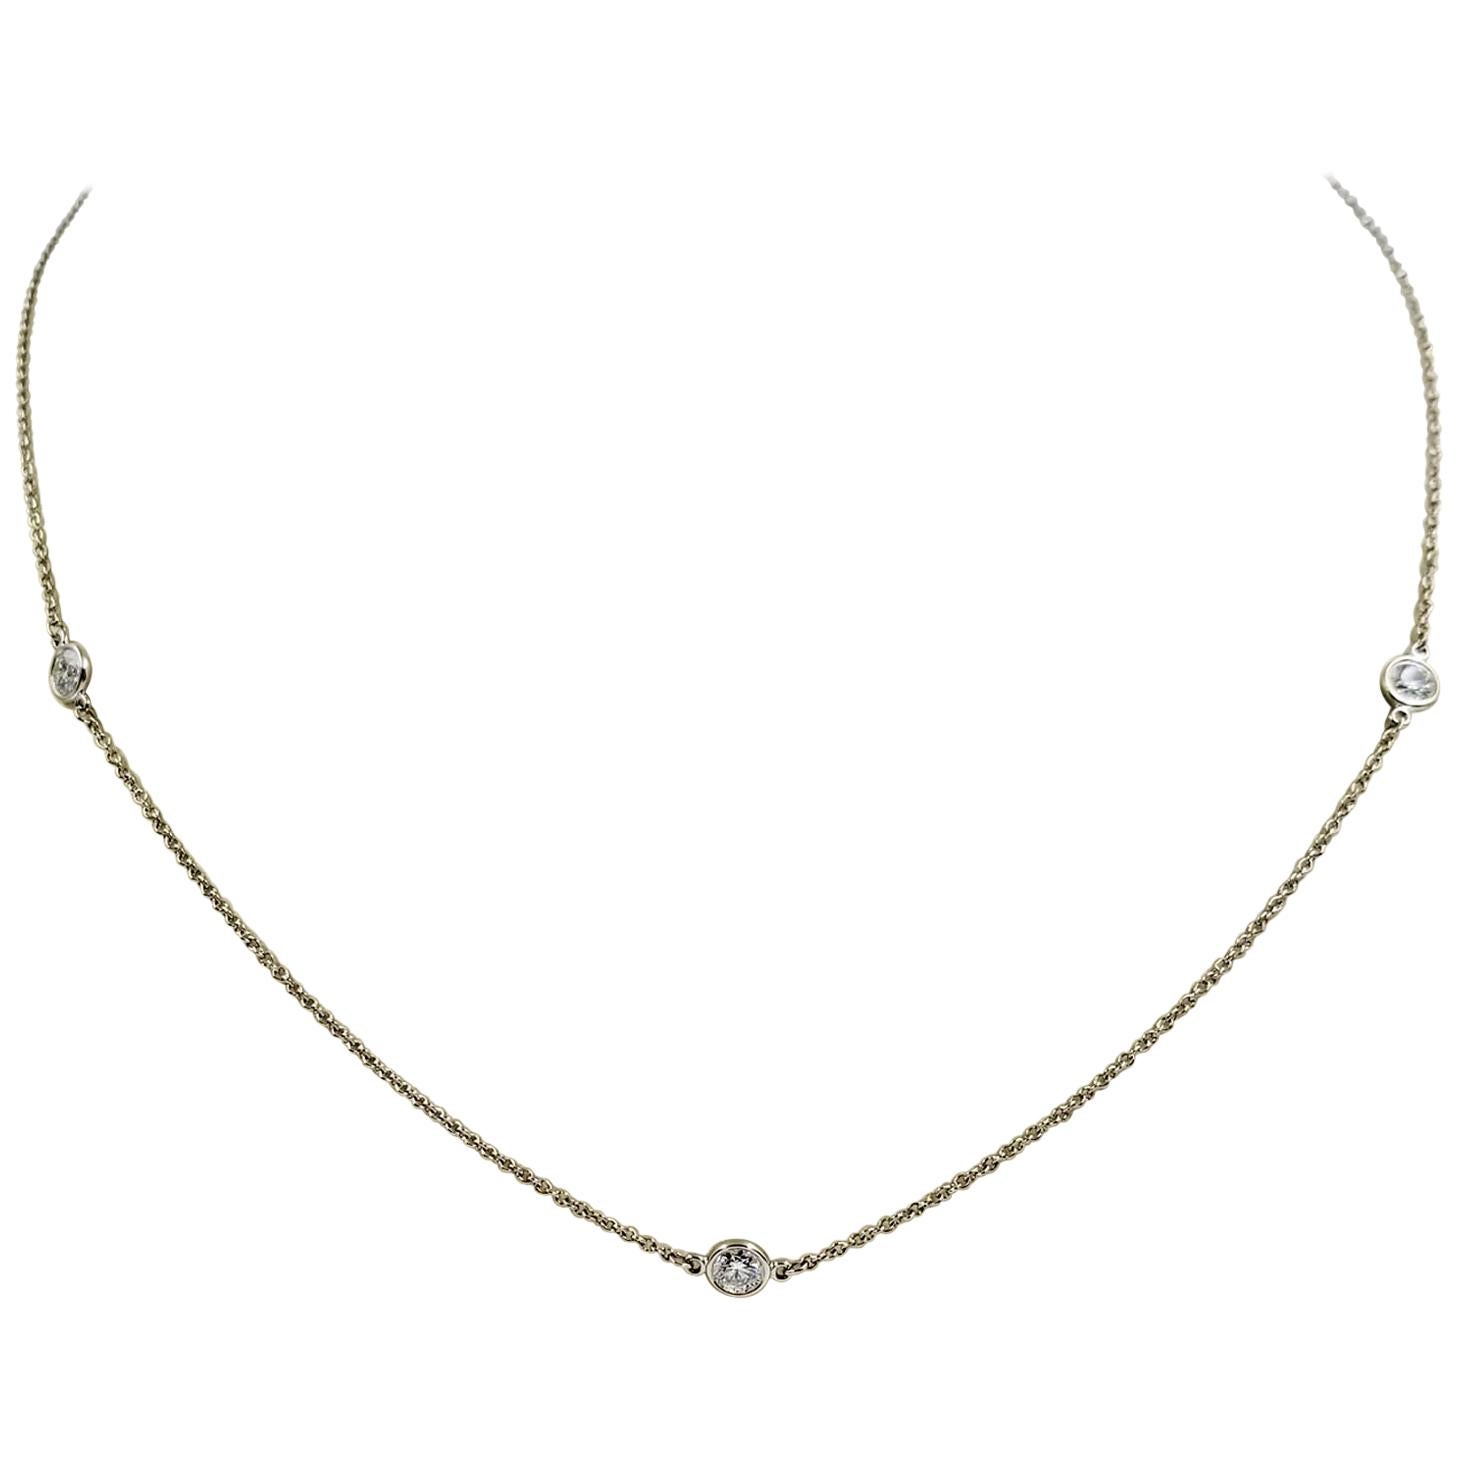 Tiffany & Co. Diamonds by the Yard Chain Necklace by Elsa Peretti